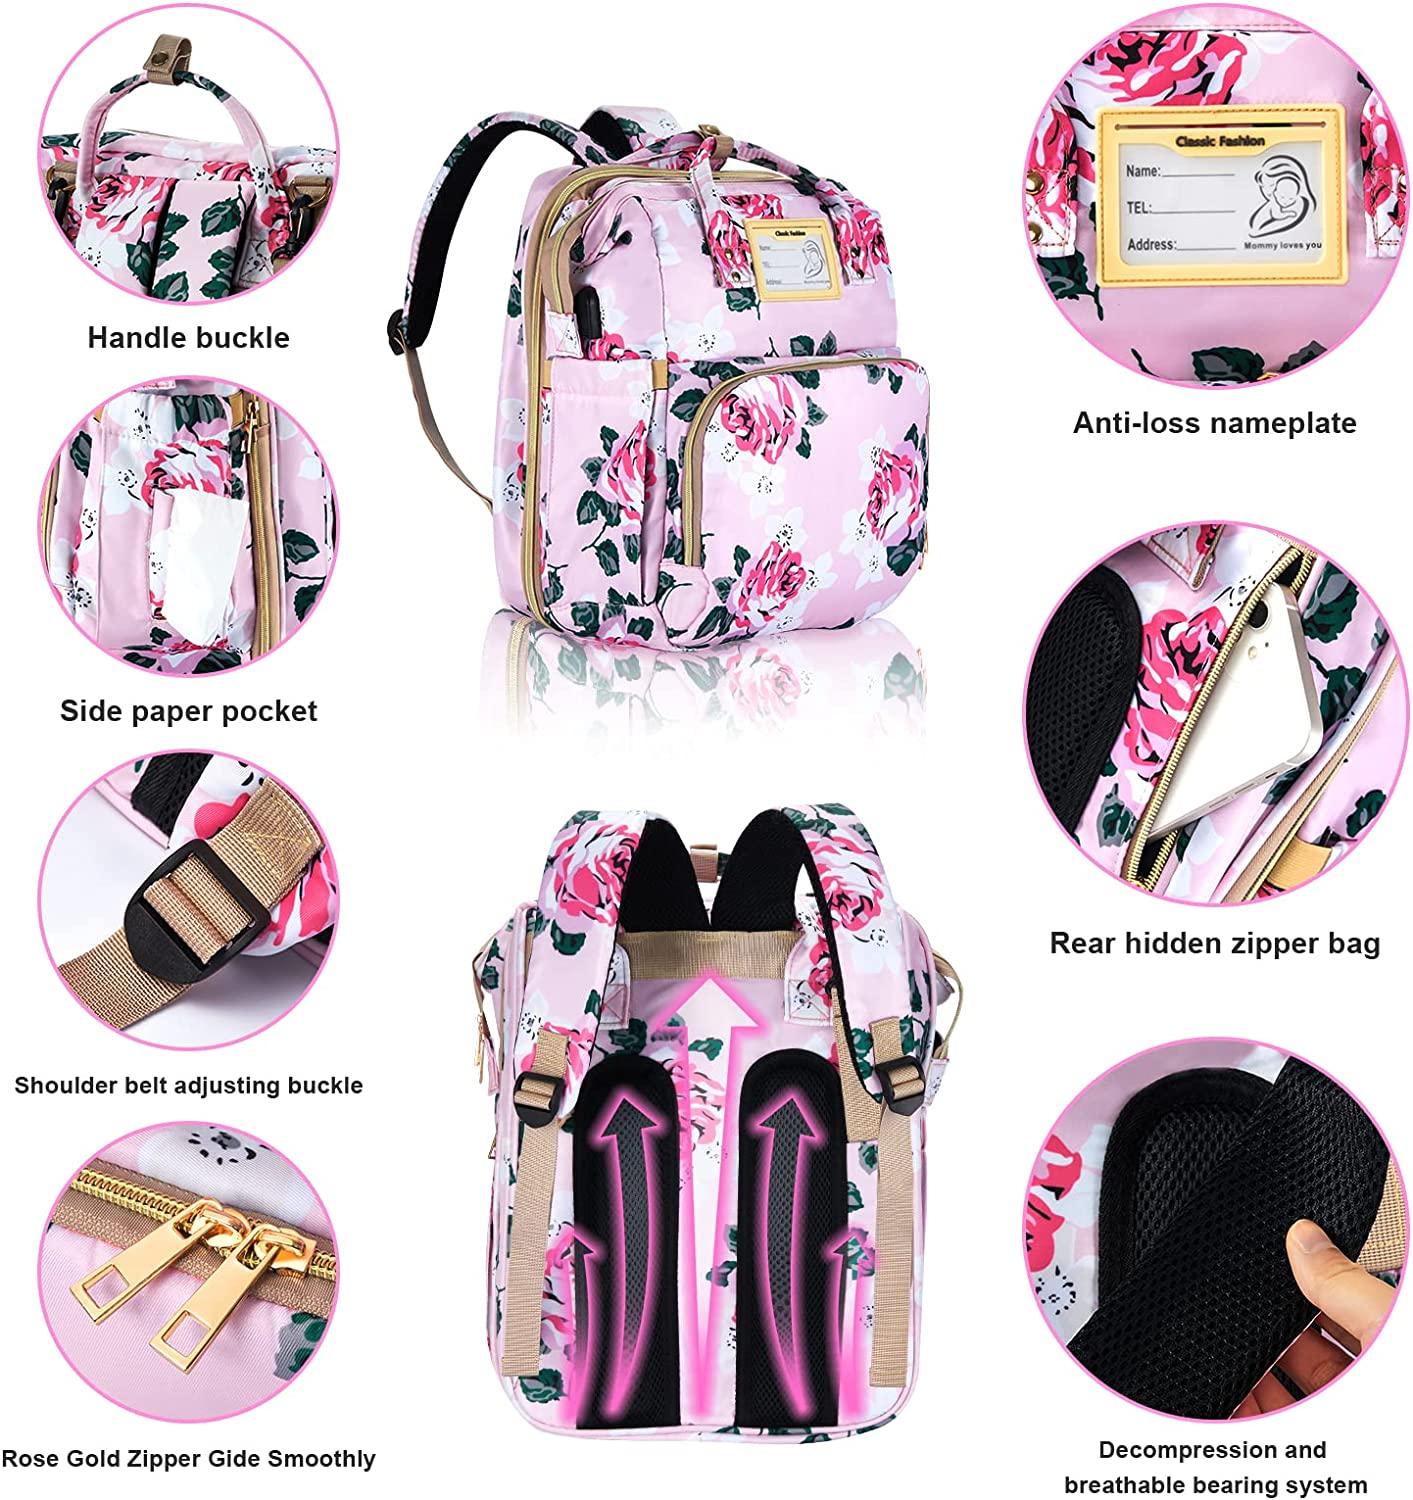 MOMMY BAG BIG PINK FUNCTIONAL LARGE BABY DIAPER TRAVEL BAG FOR BABY CARE NEW